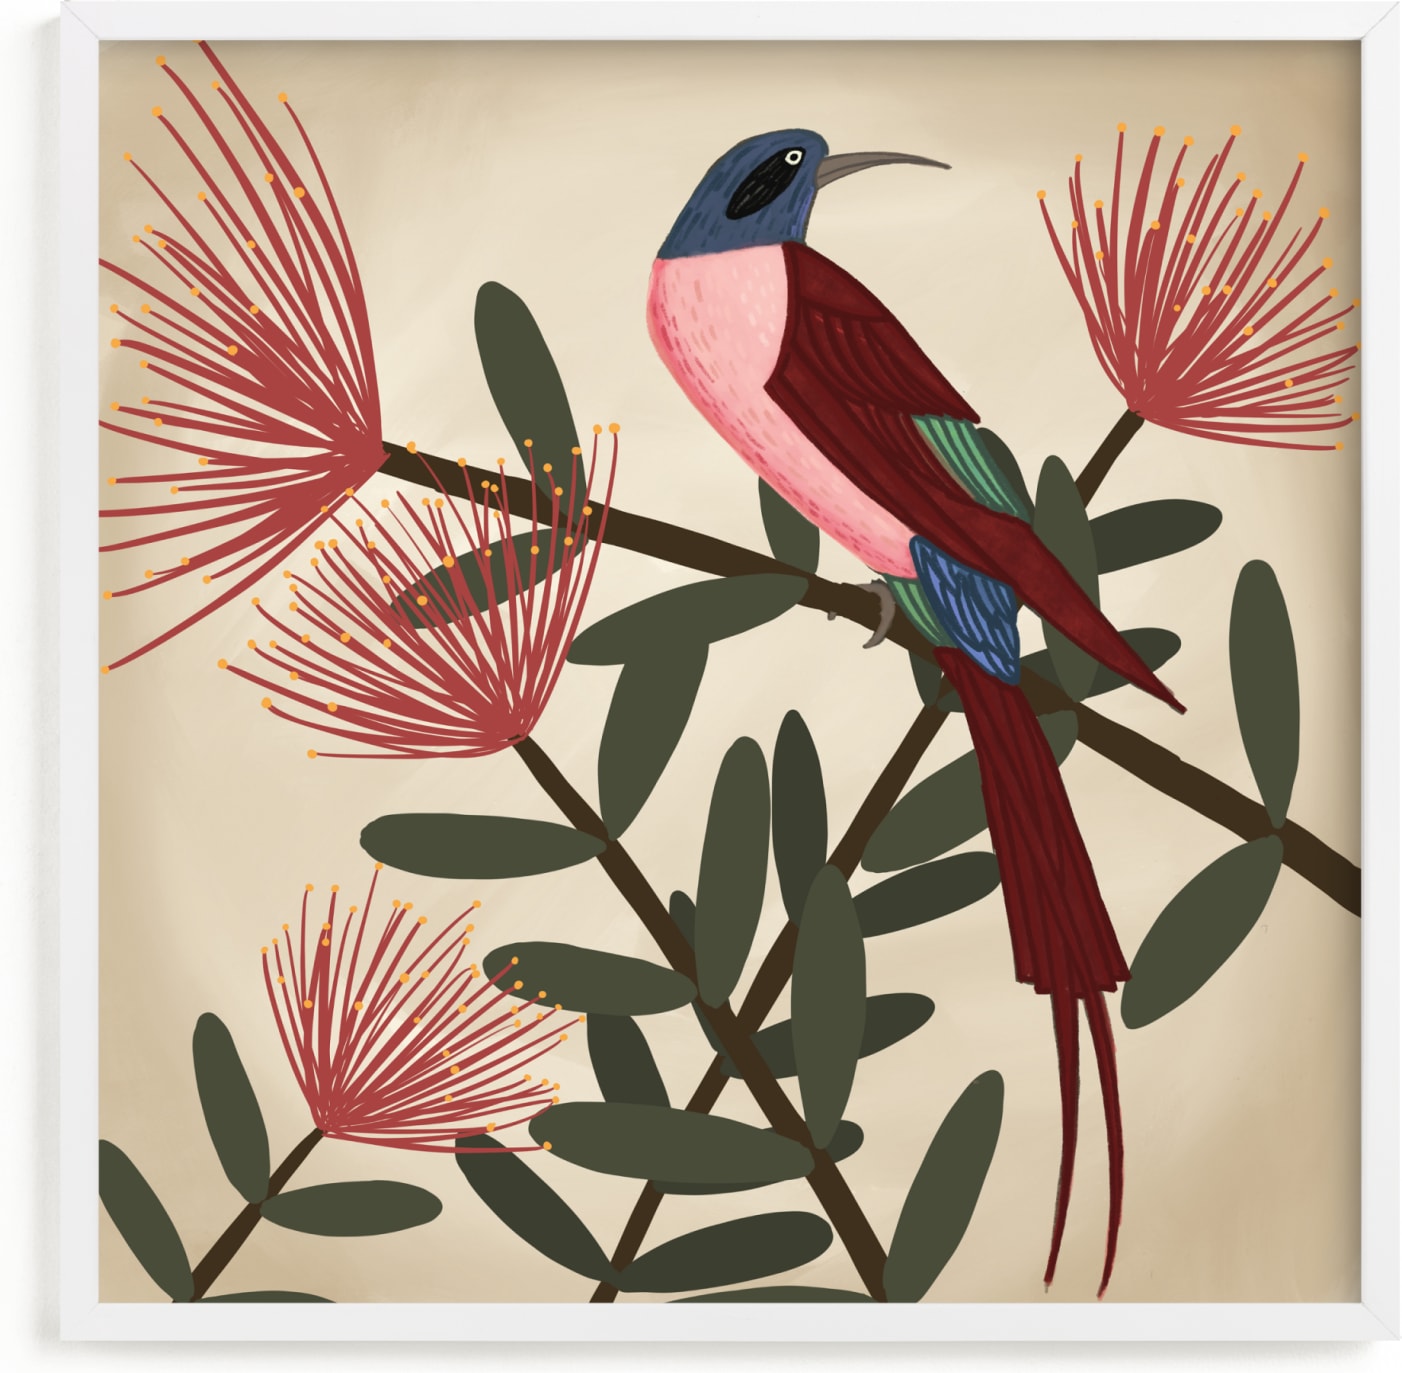 This is a colorful art by Jessie Burch called Bee Eater.